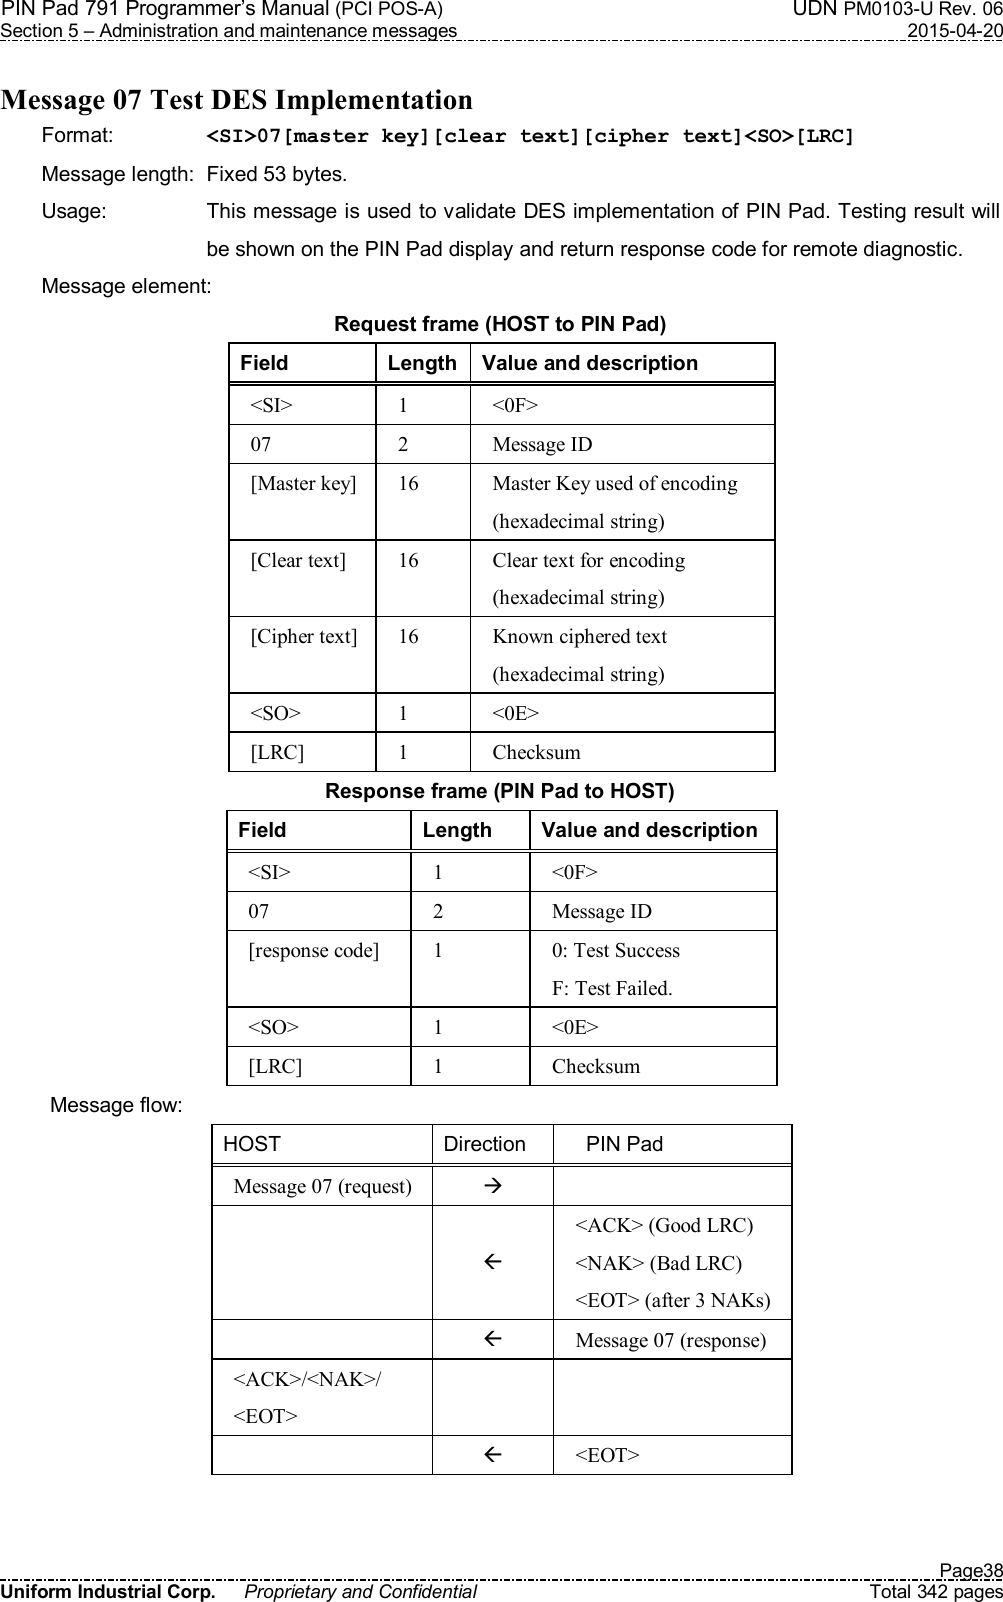 PIN Pad 791 Programmer’s Manual (PCI POS-A)  UDN PM0103-U Rev. 06 Section 5 – Administration and maintenance messages  2015-04-20   Page38 Uniform Industrial Corp.  Proprietary and Confidential  Total 342 pages  Message 07 Test DES Implementation Format:    &lt;SI&gt;07[master key][clear text][cipher text]&lt;SO&gt;[LRC] Message length:  Fixed 53 bytes. Usage:  This message is used to validate DES implementation of PIN Pad. Testing result will be shown on the PIN Pad display and return response code for remote diagnostic. Message element:   Request frame (HOST to PIN Pad) Field  Length Value and description &lt;SI&gt;  1  &lt;0F&gt; 07  2  Message ID [Master key] 16  Master Key used of encoding (hexadecimal string) [Clear text]  16  Clear text for encoding (hexadecimal string) [Cipher text] 16  Known ciphered text (hexadecimal string) &lt;SO&gt;  1  &lt;0E&gt; [LRC]  1  Checksum Response frame (PIN Pad to HOST) Field  Length  Value and description &lt;SI&gt;  1  &lt;0F&gt; 07  2  Message ID [response code]  1  0: Test Success F: Test Failed. &lt;SO&gt;  1  &lt;0E&gt; [LRC]  1  Checksum Message flow: HOST  Direction      PIN Pad Message 07 (request)      &lt;ACK&gt; (Good LRC) &lt;NAK&gt; (Bad LRC) &lt;EOT&gt; (after 3 NAKs)   Message 07 (response) &lt;ACK&gt;/&lt;NAK&gt;/ &lt;EOT&gt;      &lt;EOT&gt;   